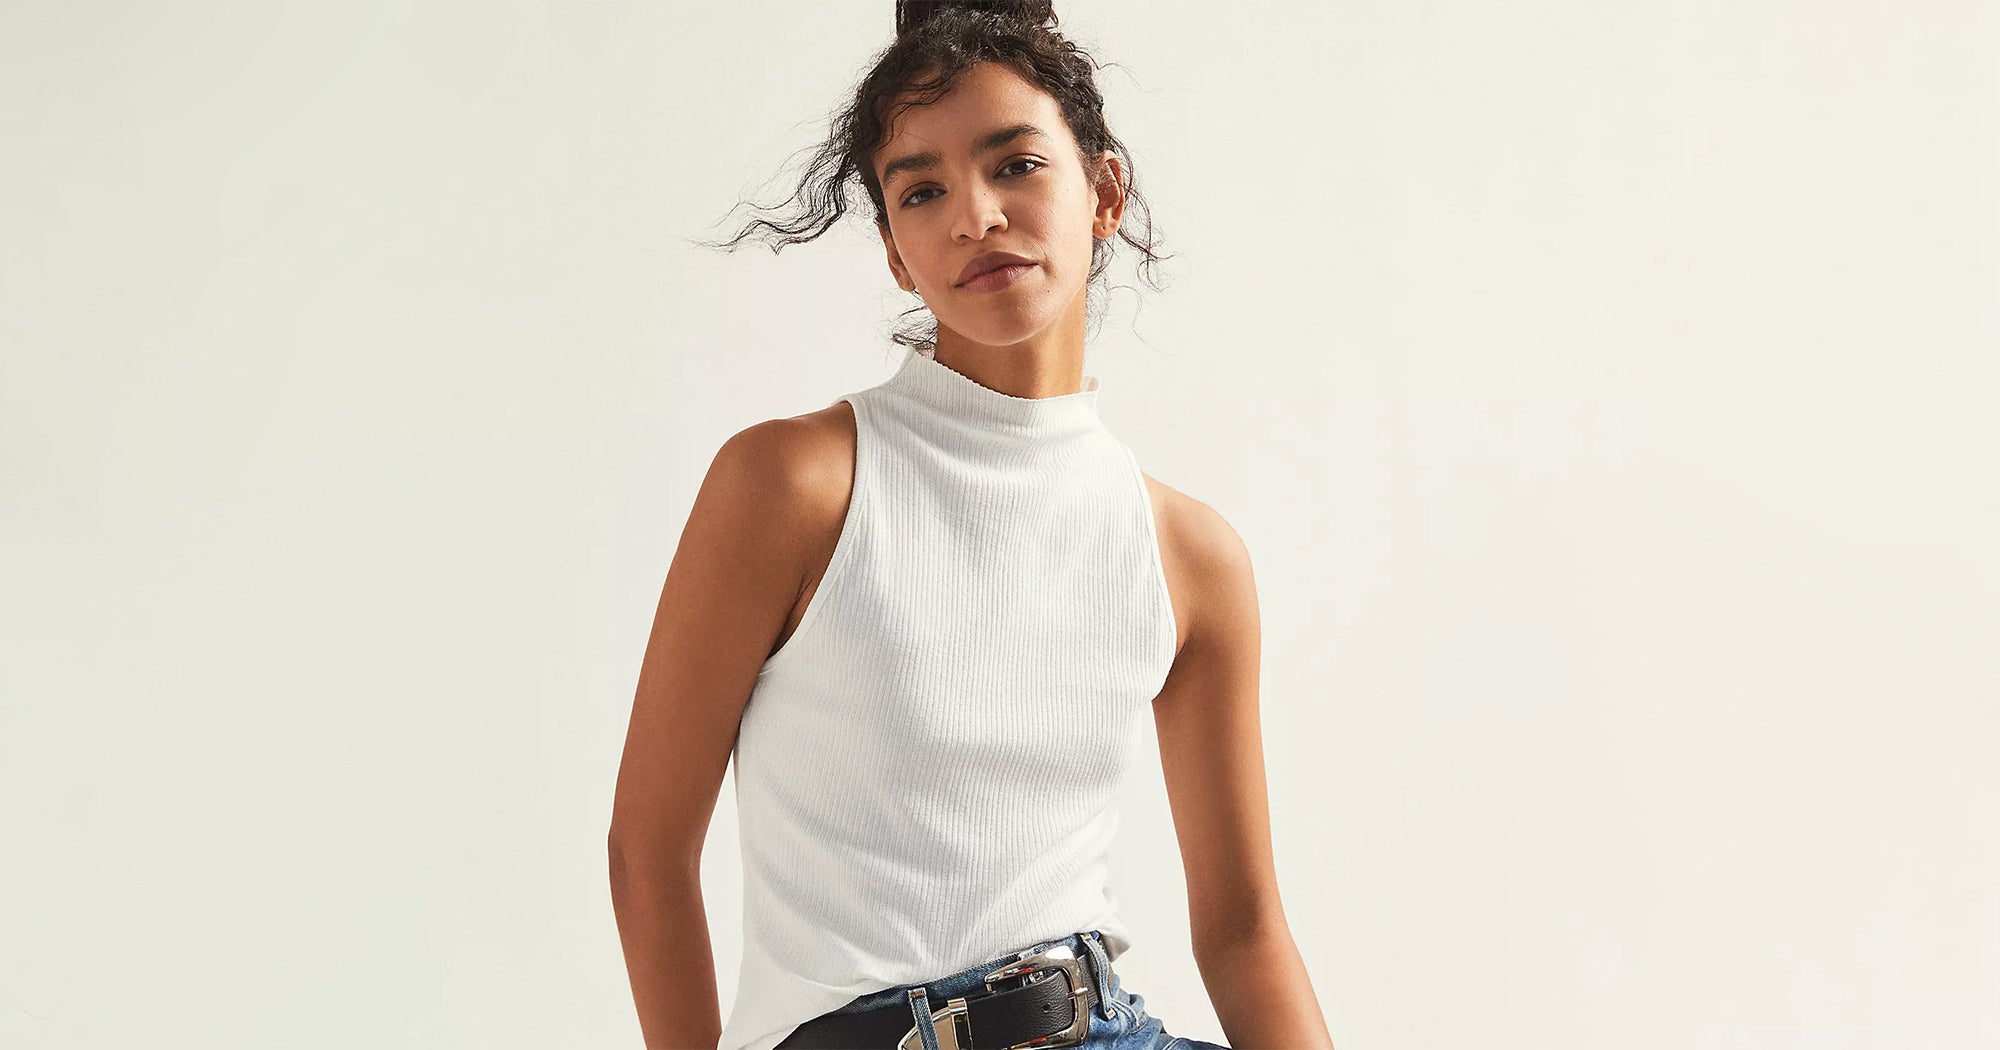 White Sleeveless Tops for Women - Up to 70% off